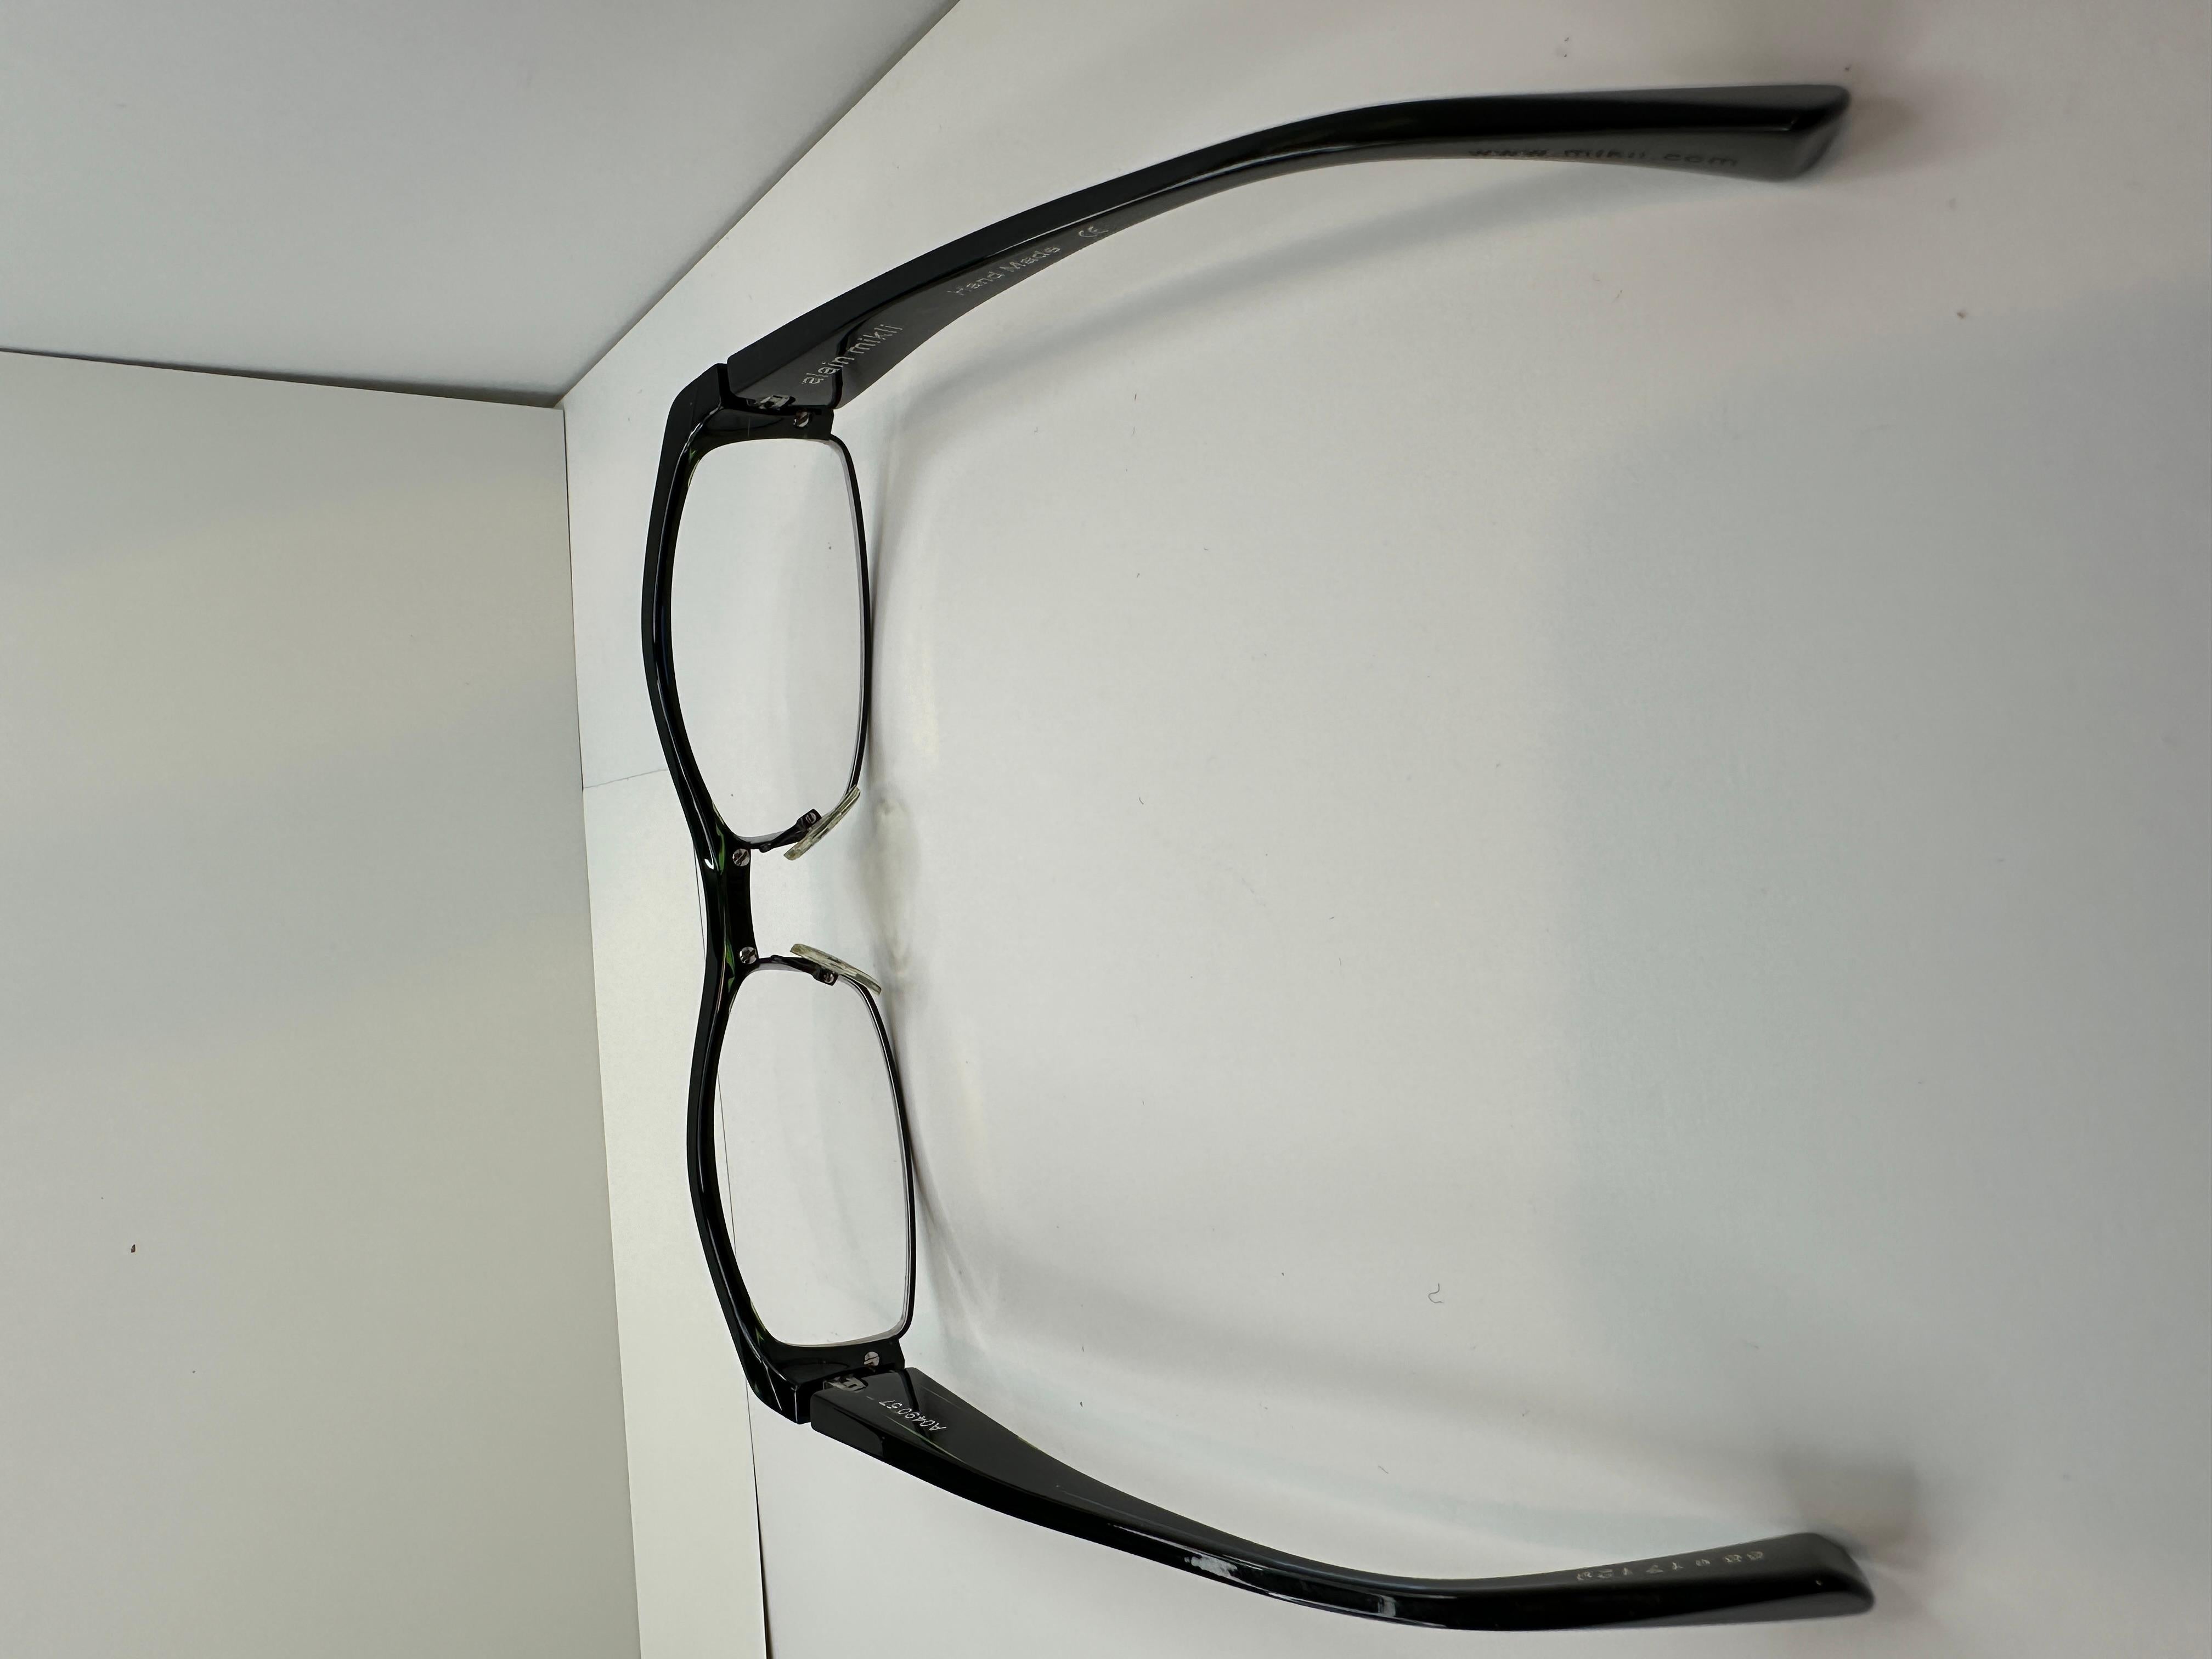 Alain Mikli thick black lucite prescription frames accented with clear green stripes along the arms are hand-made in Japan. The length across the front measures 5 1/2 inches, height is 1 1/4 inches, arm's length measures 5 2/16 inches. 